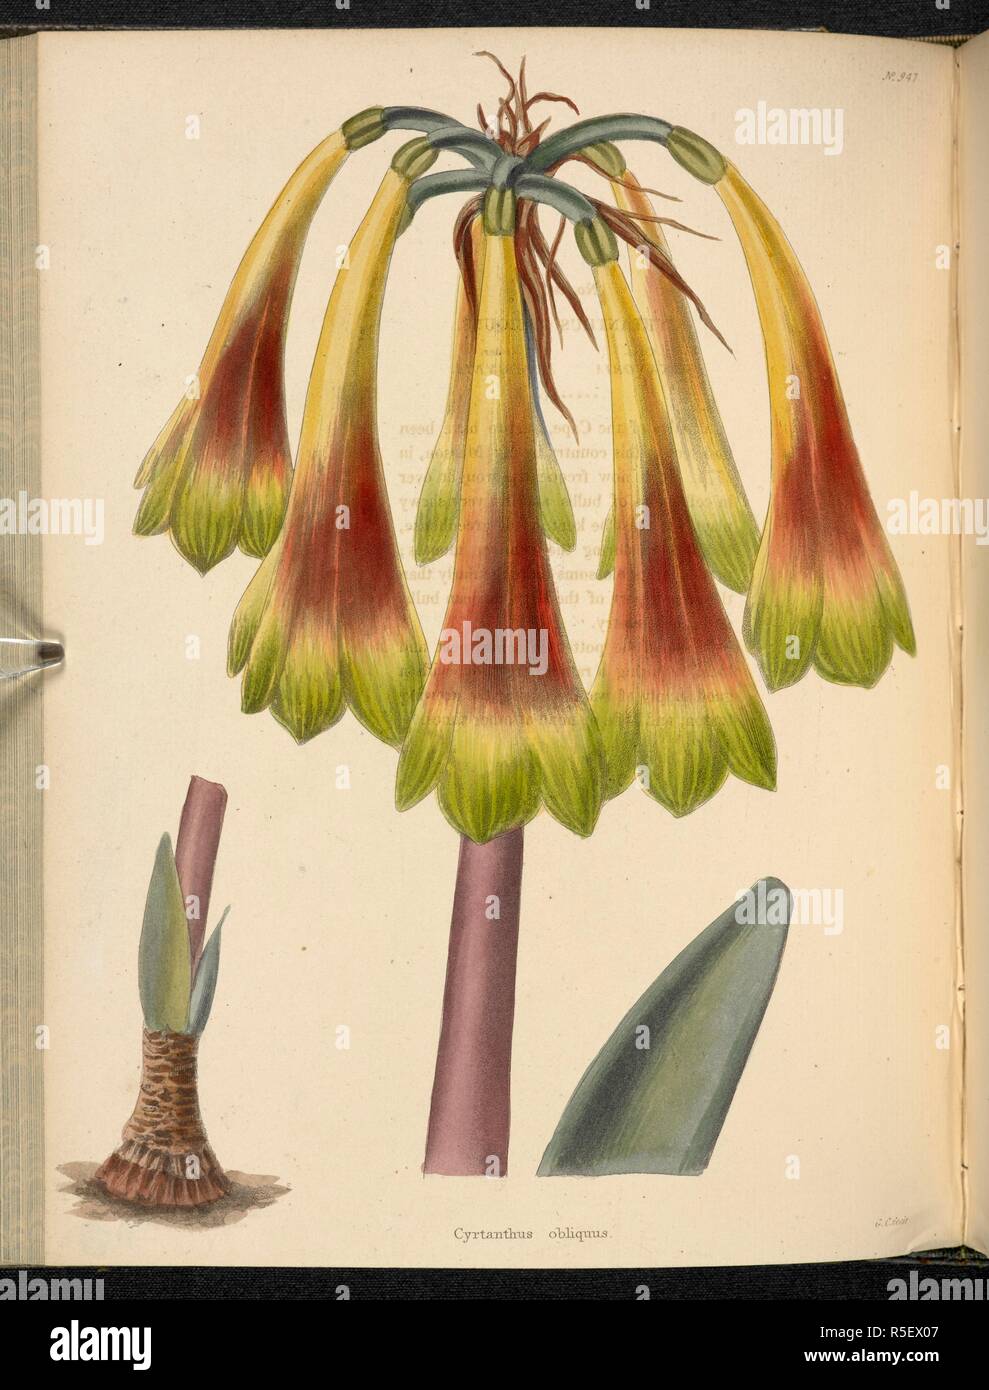 Cyrtanthus obliquus. The Botanical Cabinet, consisting of coloured delineations of plants, from all countries, with a short account of each, etc. By C. Loddiges and Sons ... The plates by G. Cooke. vol. 1-20. London, 1817-33. Source: 443.b.14, vol 10, no.947. Author: Cooke, George. Stock Photo